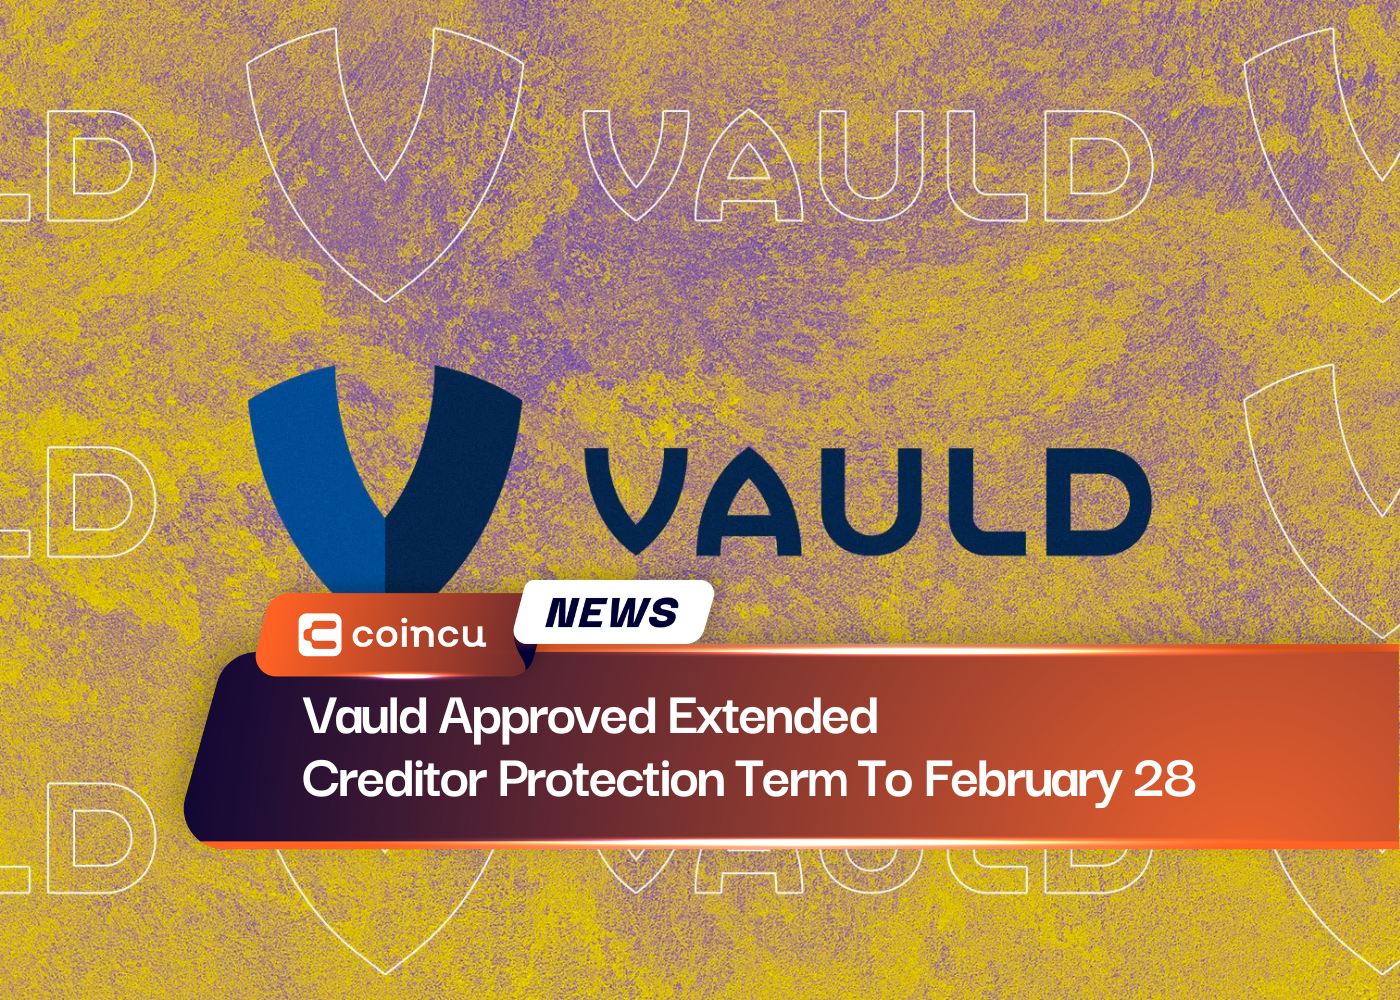 Vauld Approved Extended Creditor Protection Term To February 28